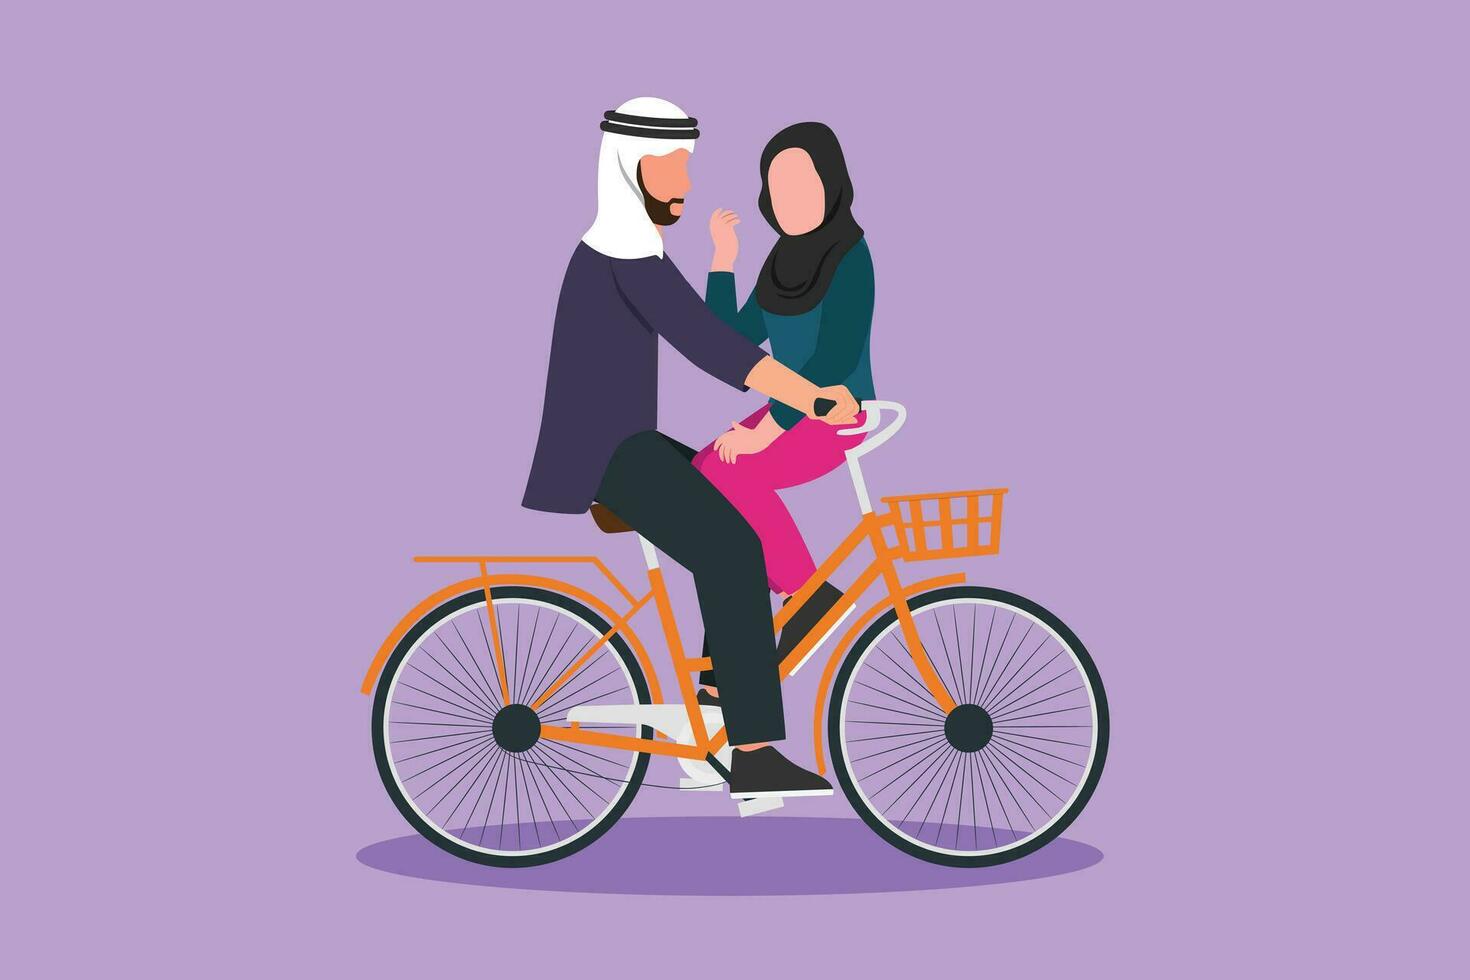 Character flat drawing happy young man and woman riding bicycle face to face. Romantic Arab couple is riding bicycle together. Happy family spend time with exercise. Cartoon design vector illustration